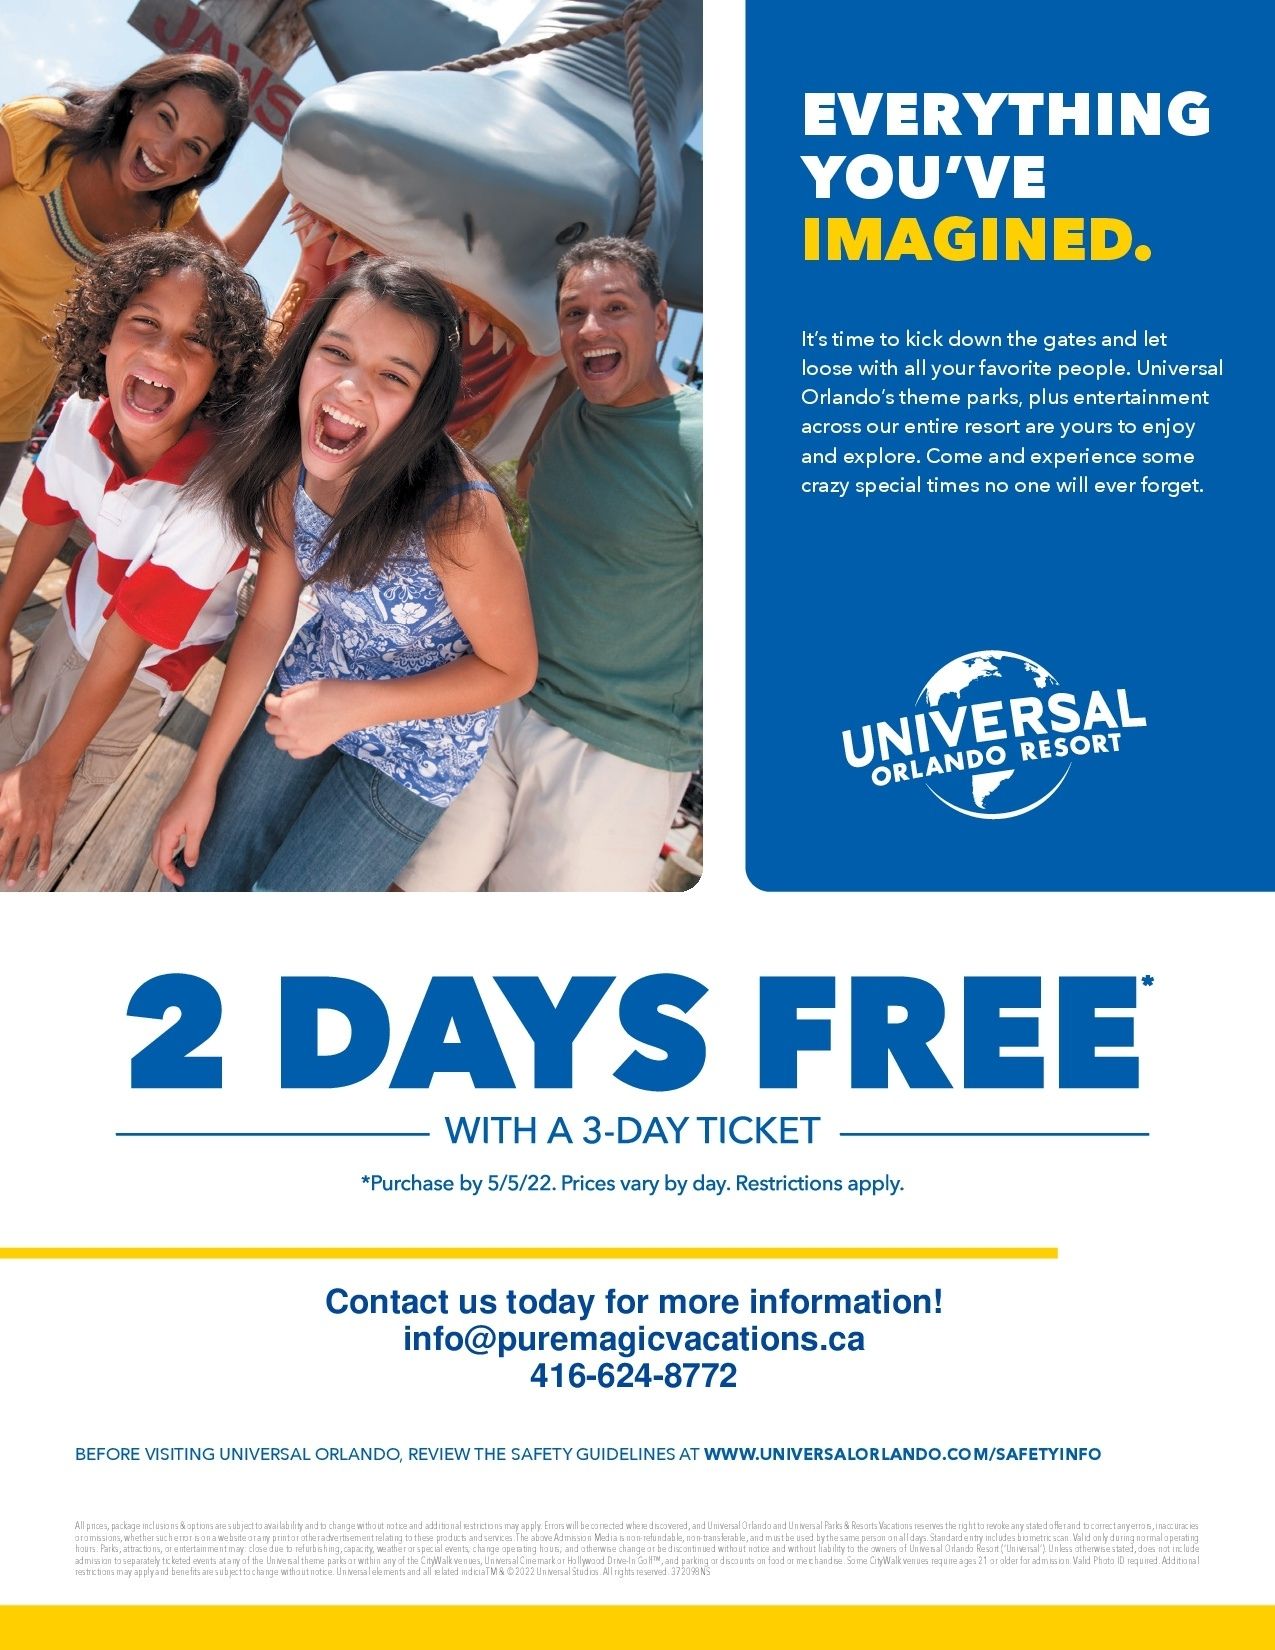 2 Days Free! With a 3-Day Ticket